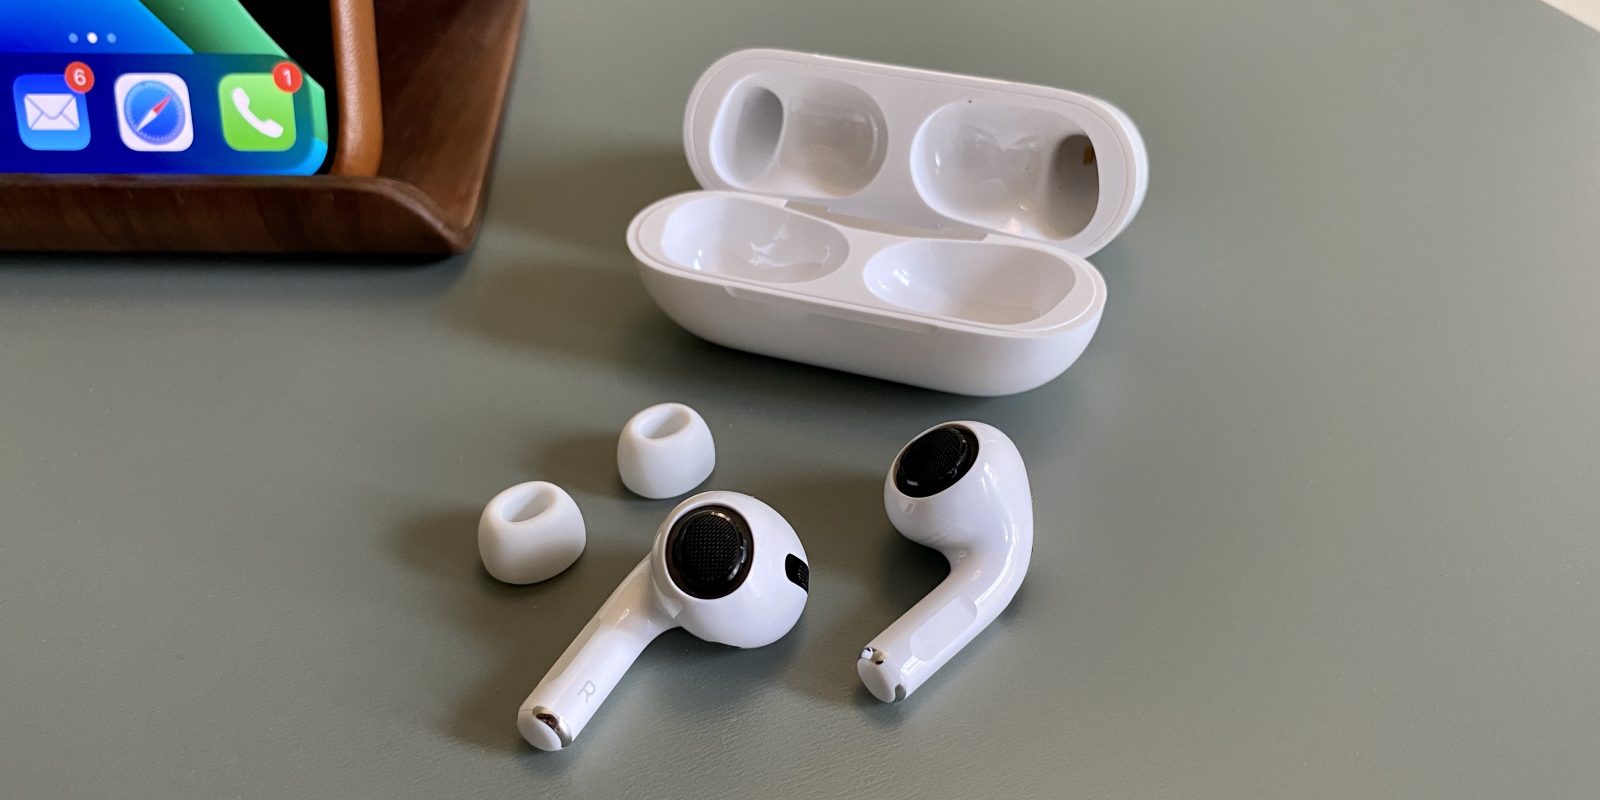 How to clean dirty AirPods Pro and charging case